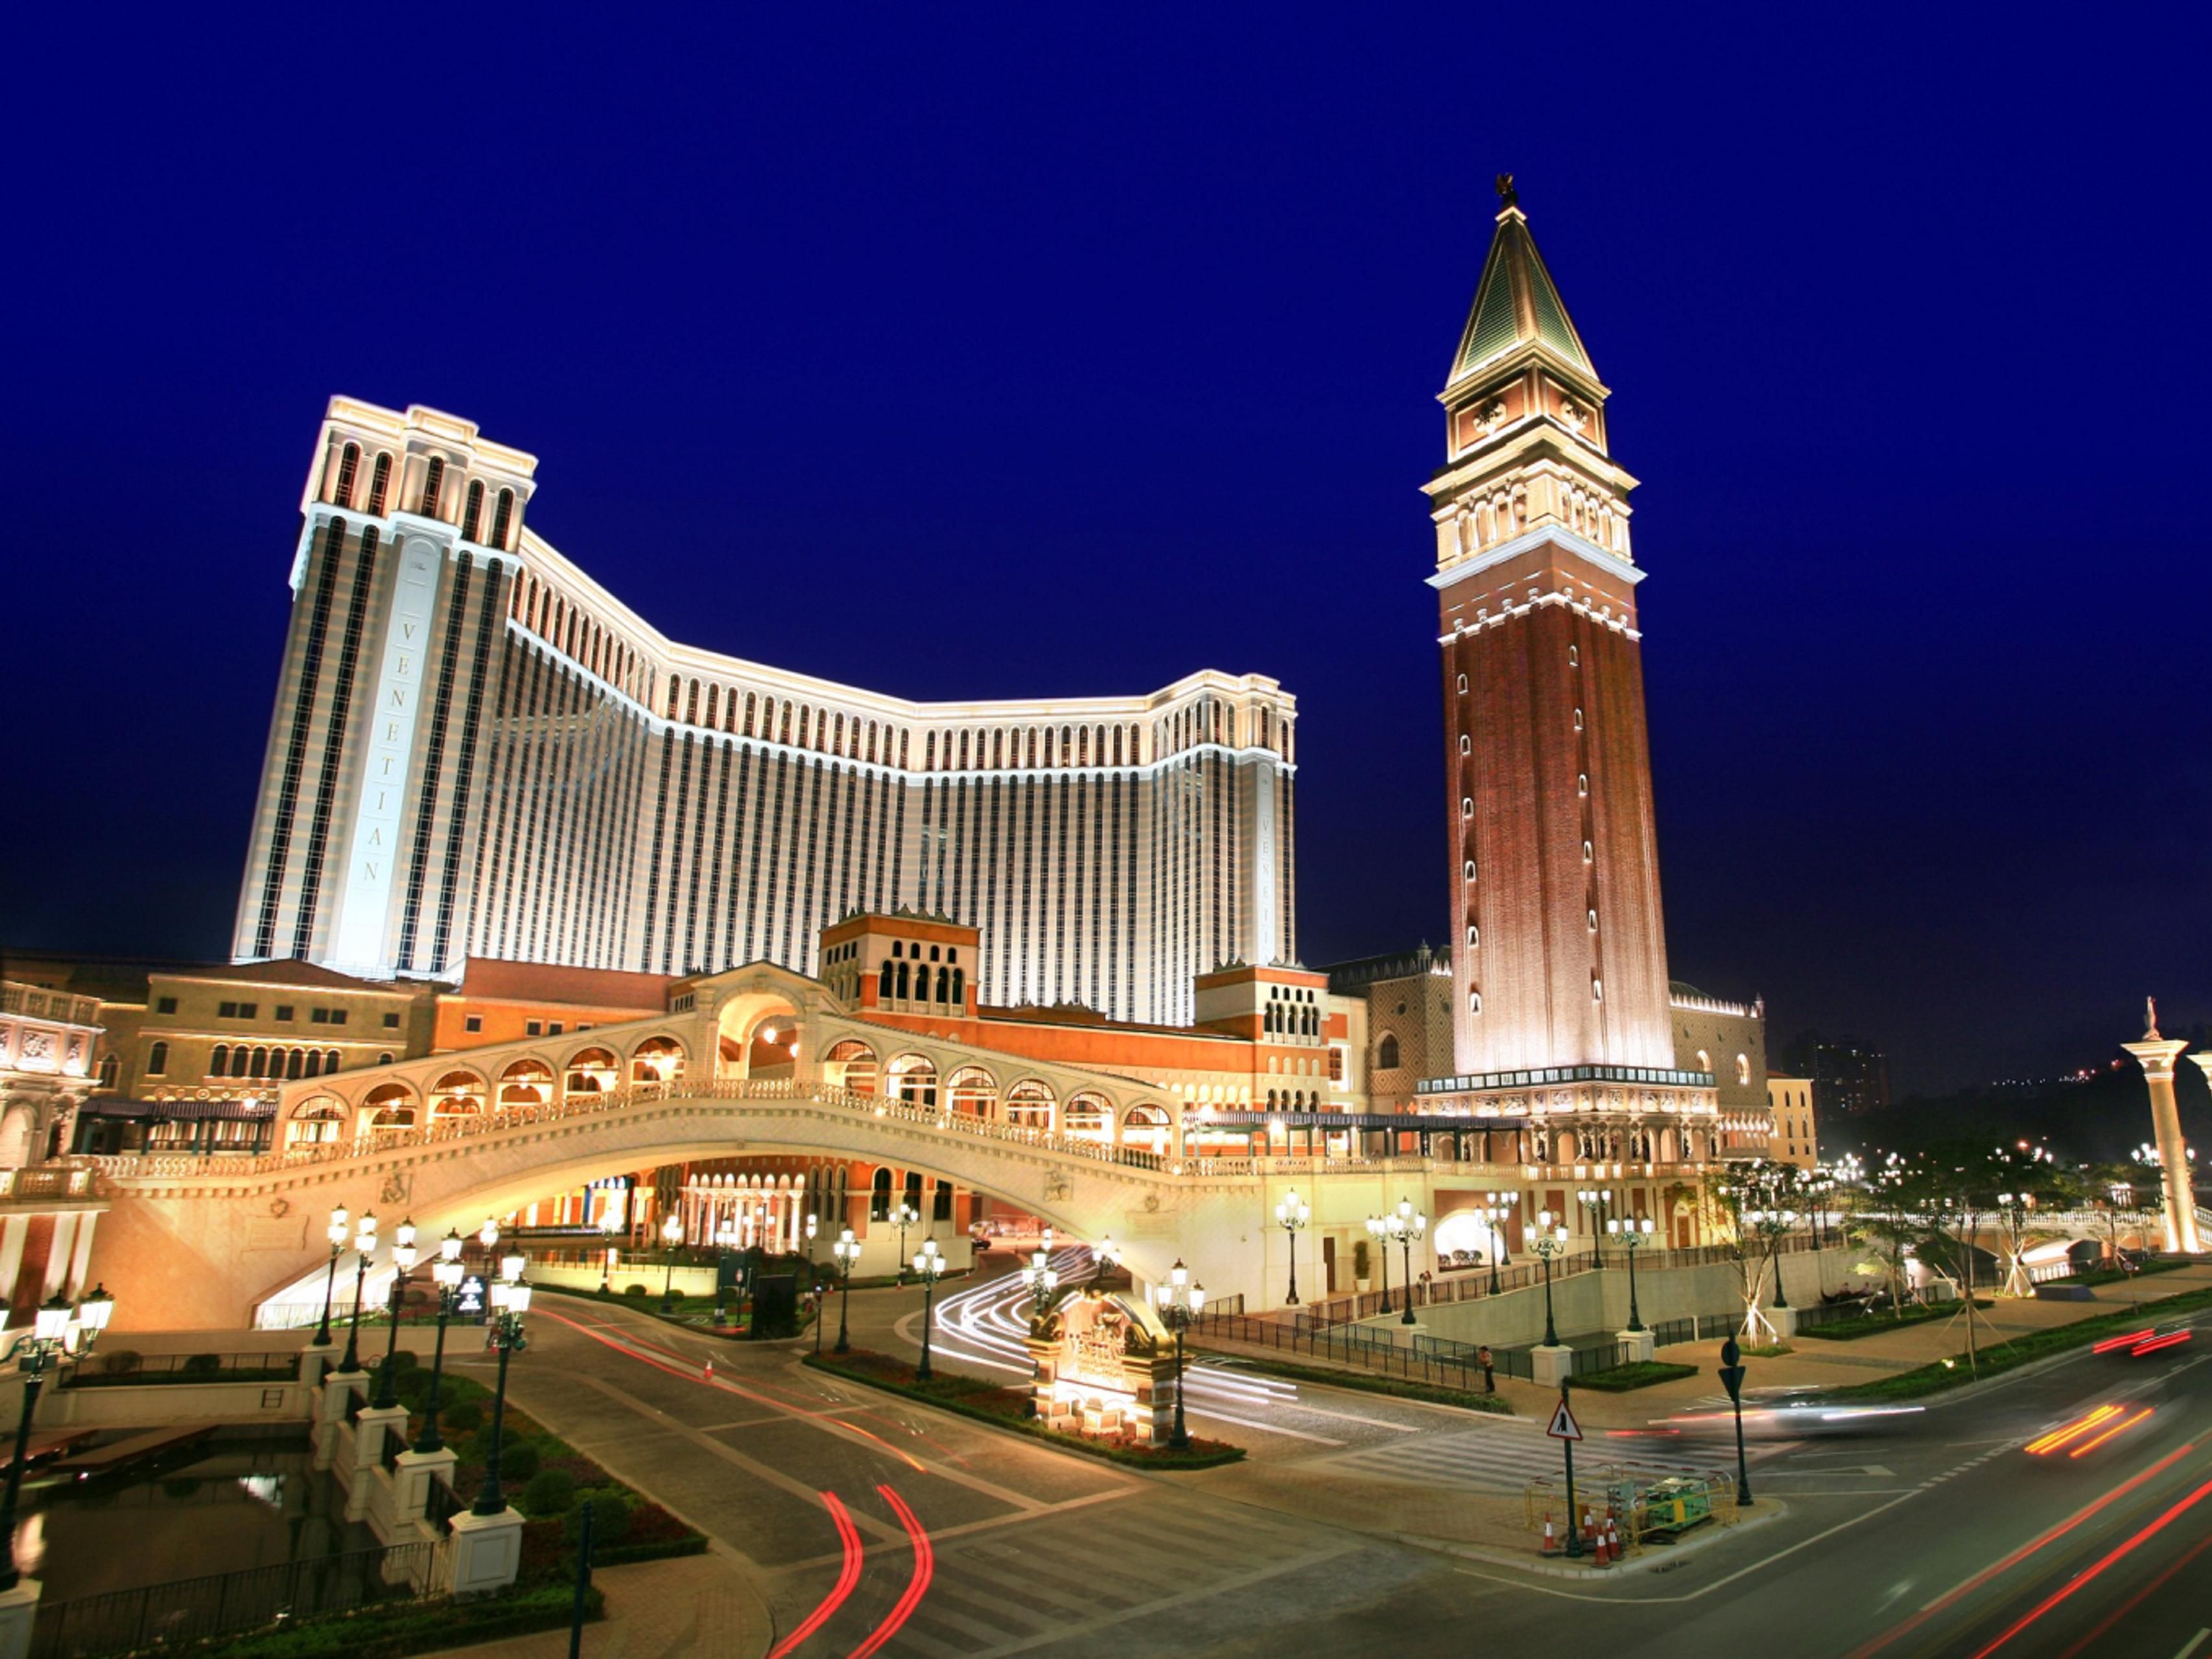 InterContinental Alliance Resorts The Macao Luxury Hotel in